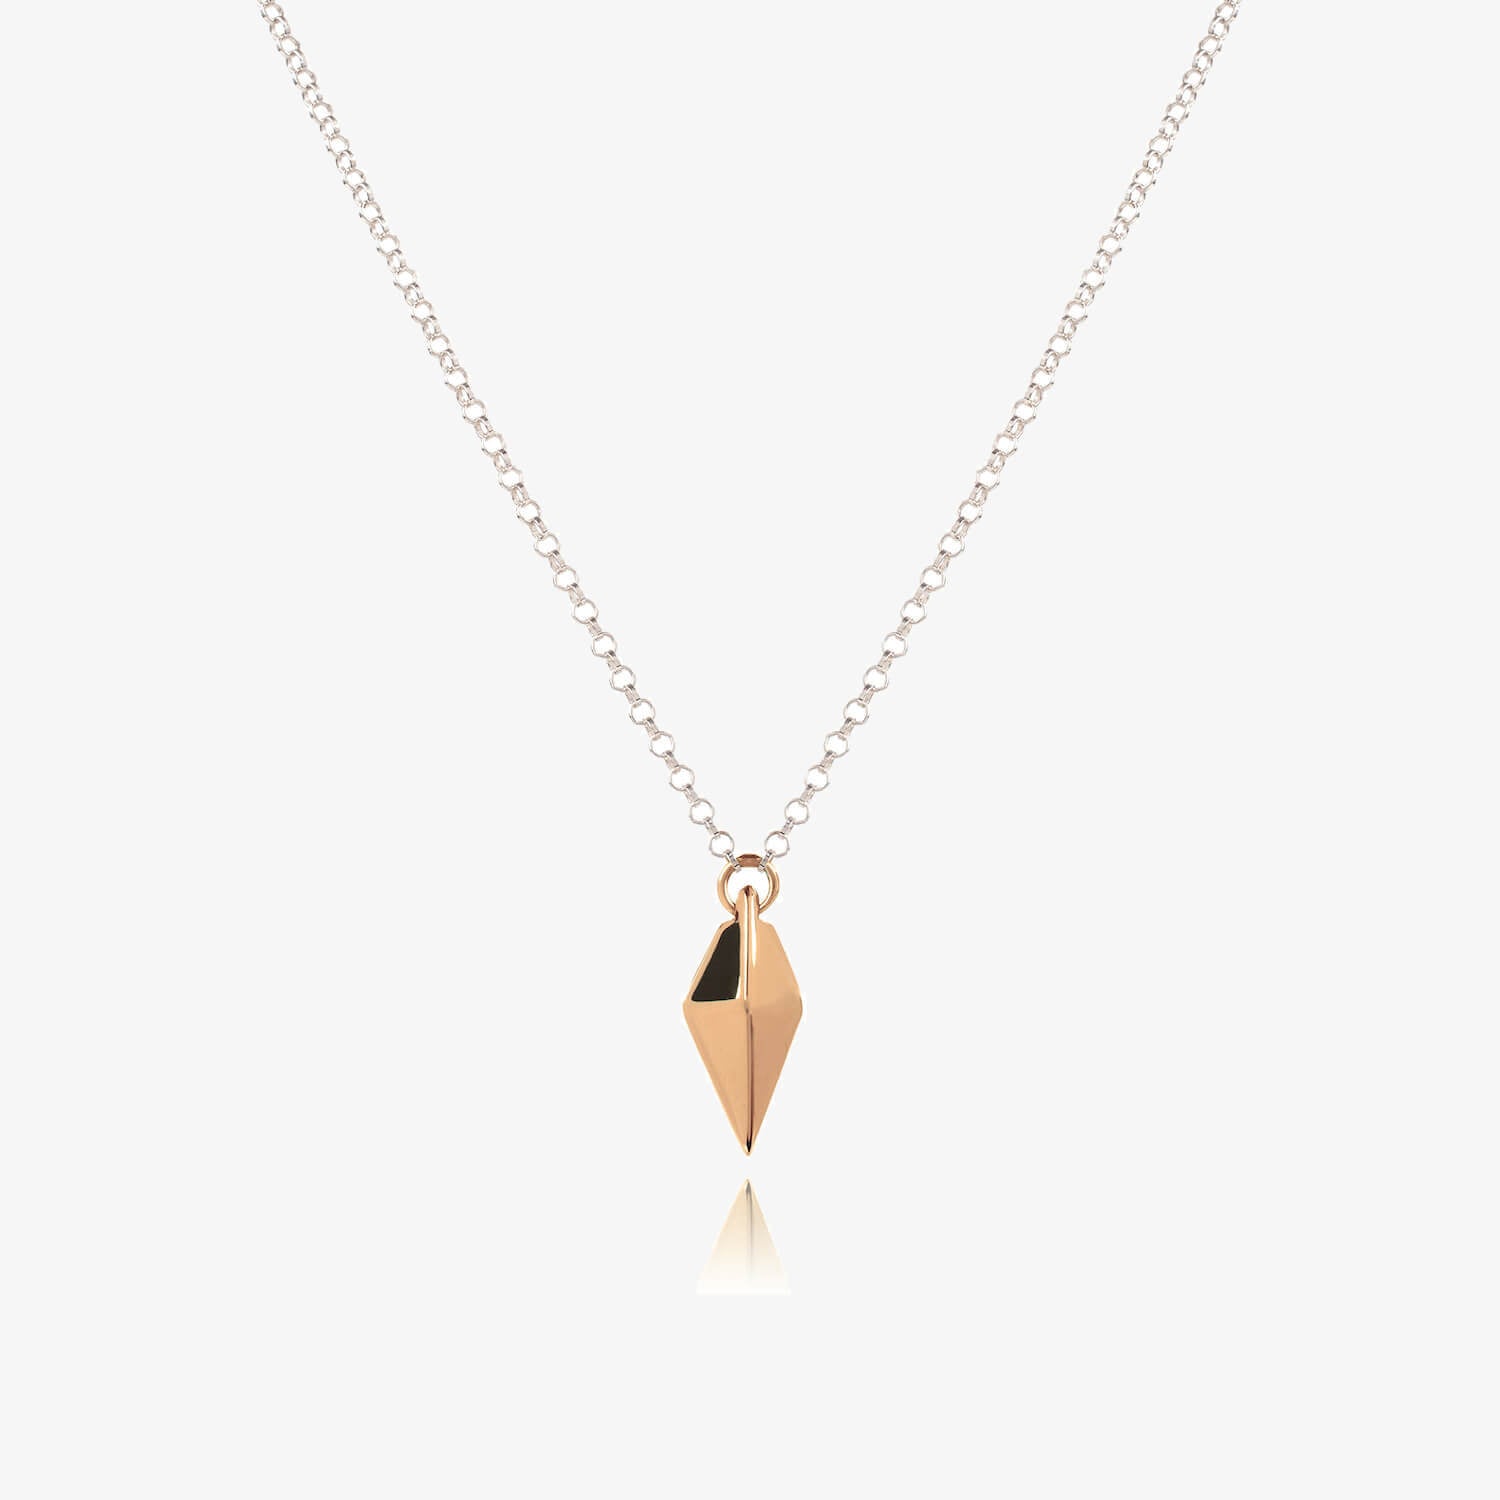 Silver chain with a rose gold kite shaped charm